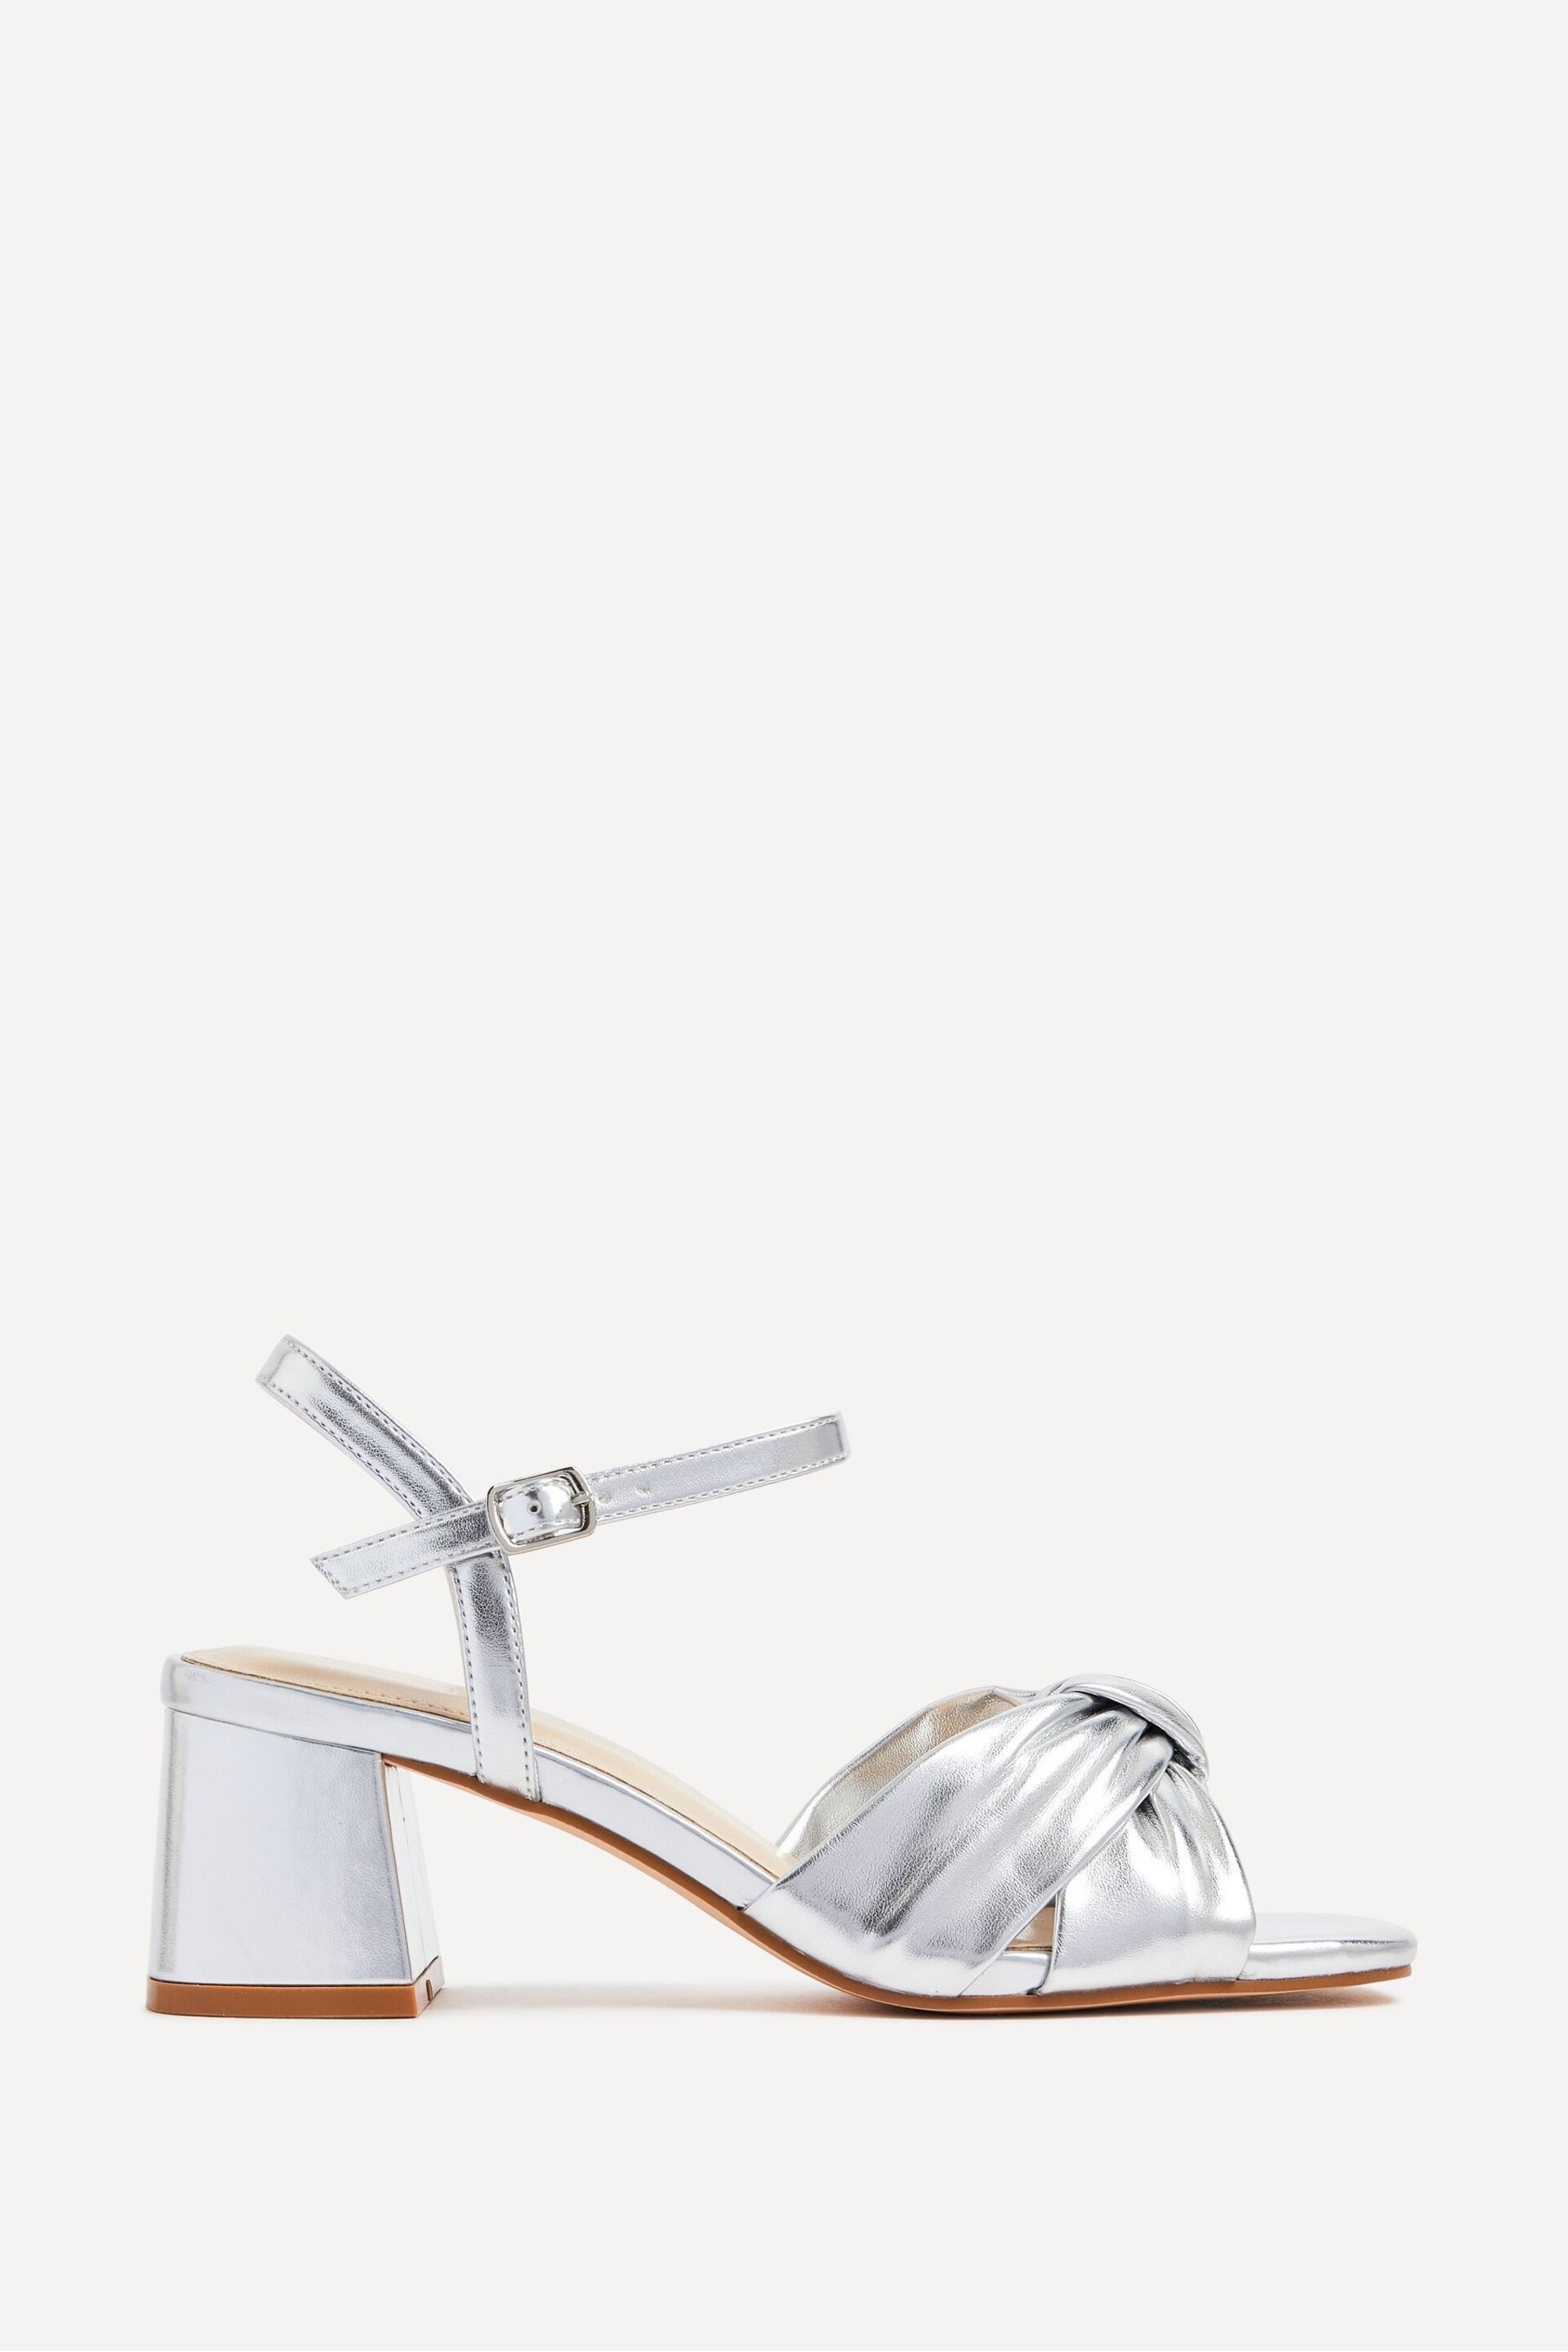 Linzi Silver Charlotte Block Heeled Sandals With Bow Front Detail - Image 2 of 5